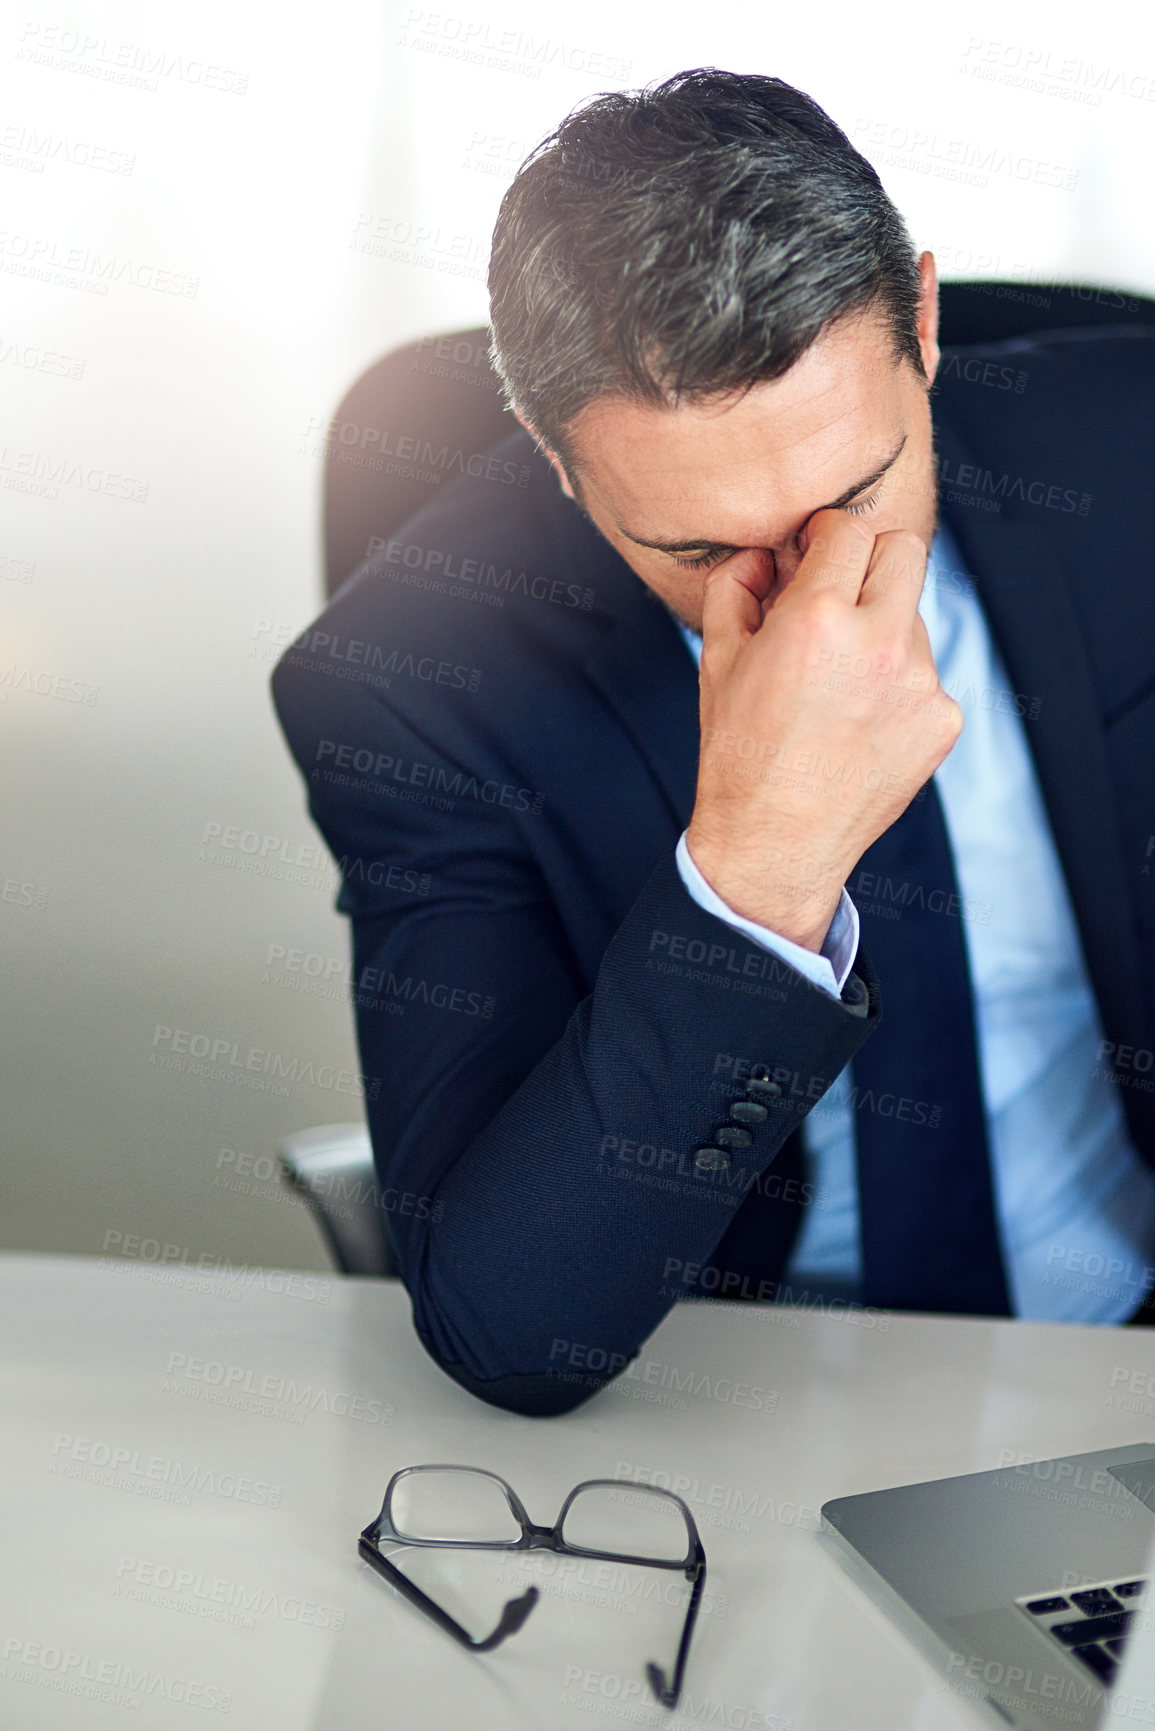 Buy stock photo Shot of a businessman experiencing stress at the office